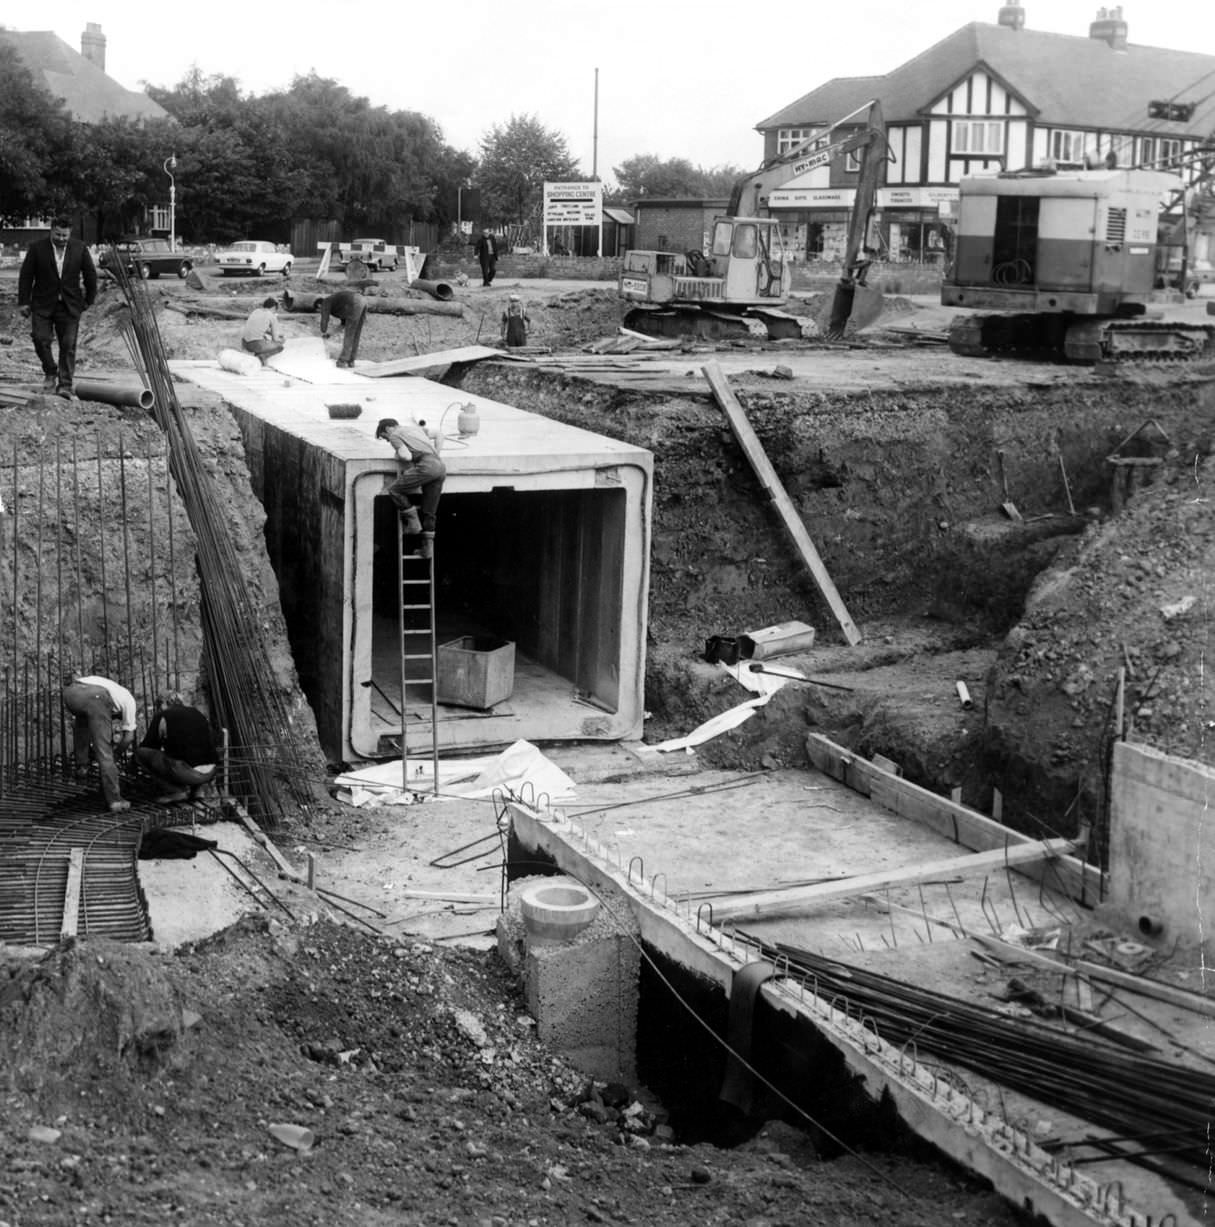 To get traffic moving on a new dual carriageway at Coventry Road, Yardley, sections of a pedestrian subway are being laid, 3rd October 1969.